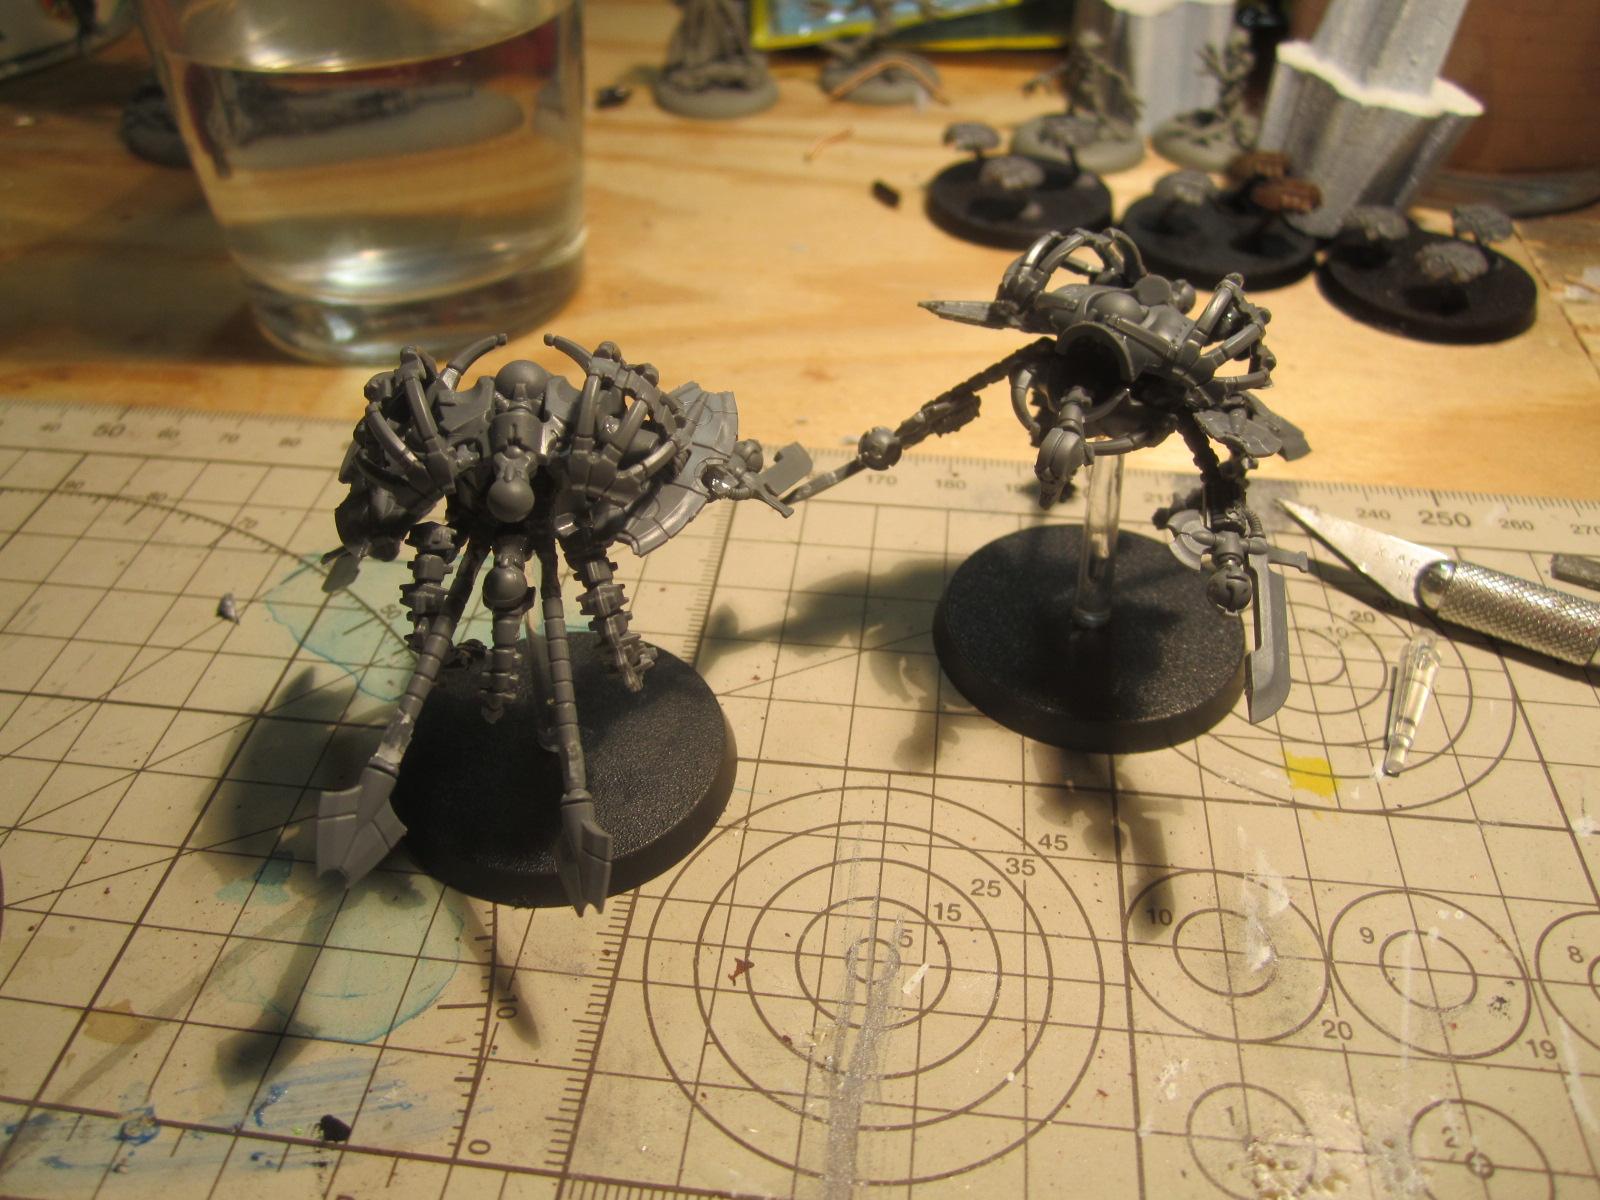 Two Wraiths in our growing force!